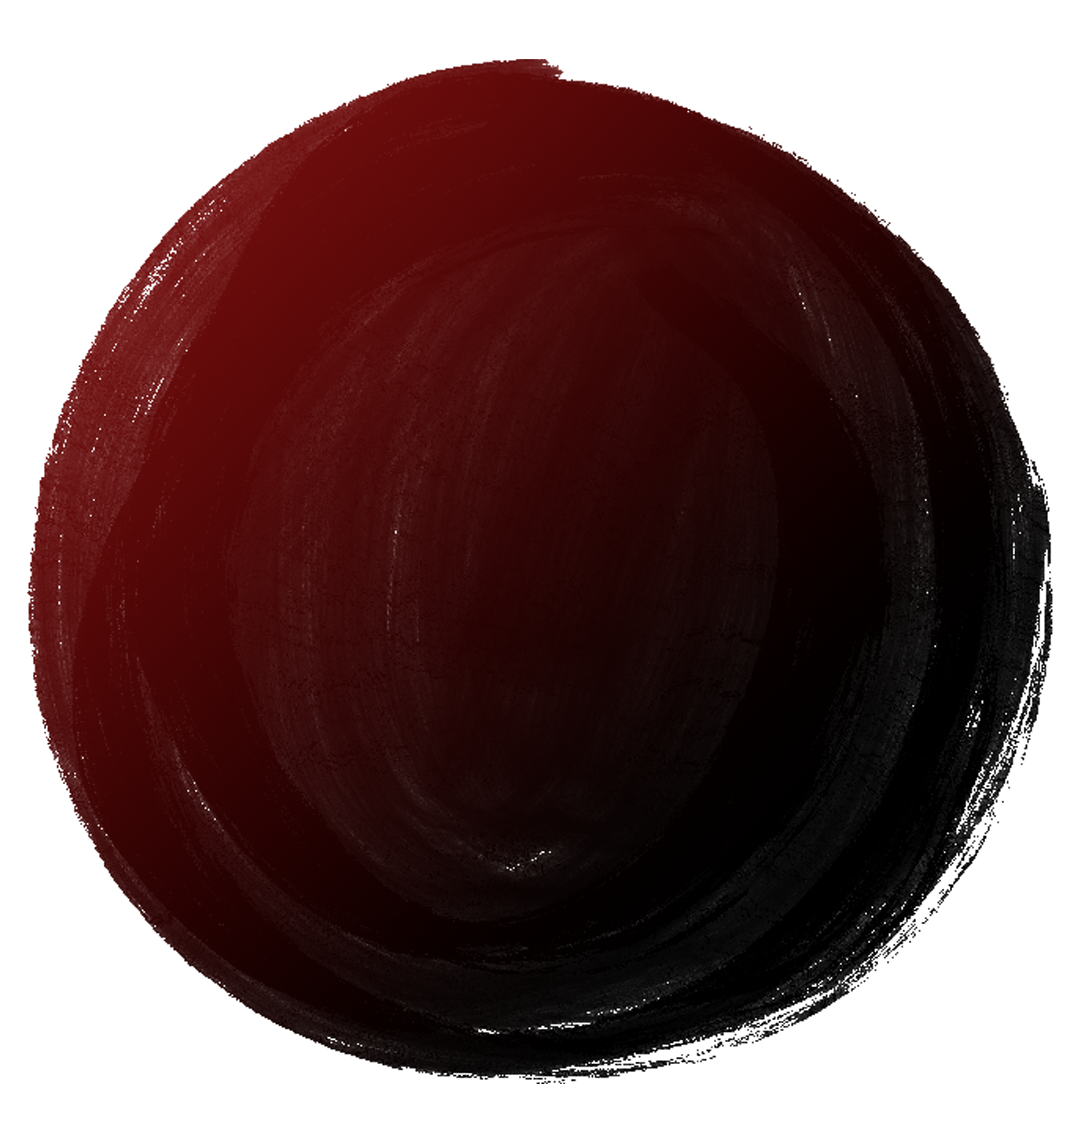 https://cld.accentuate.io/557177307220/1678113093408/BLOG-Period-Blood-Colour-black-red.png?v=1678113093408&options=